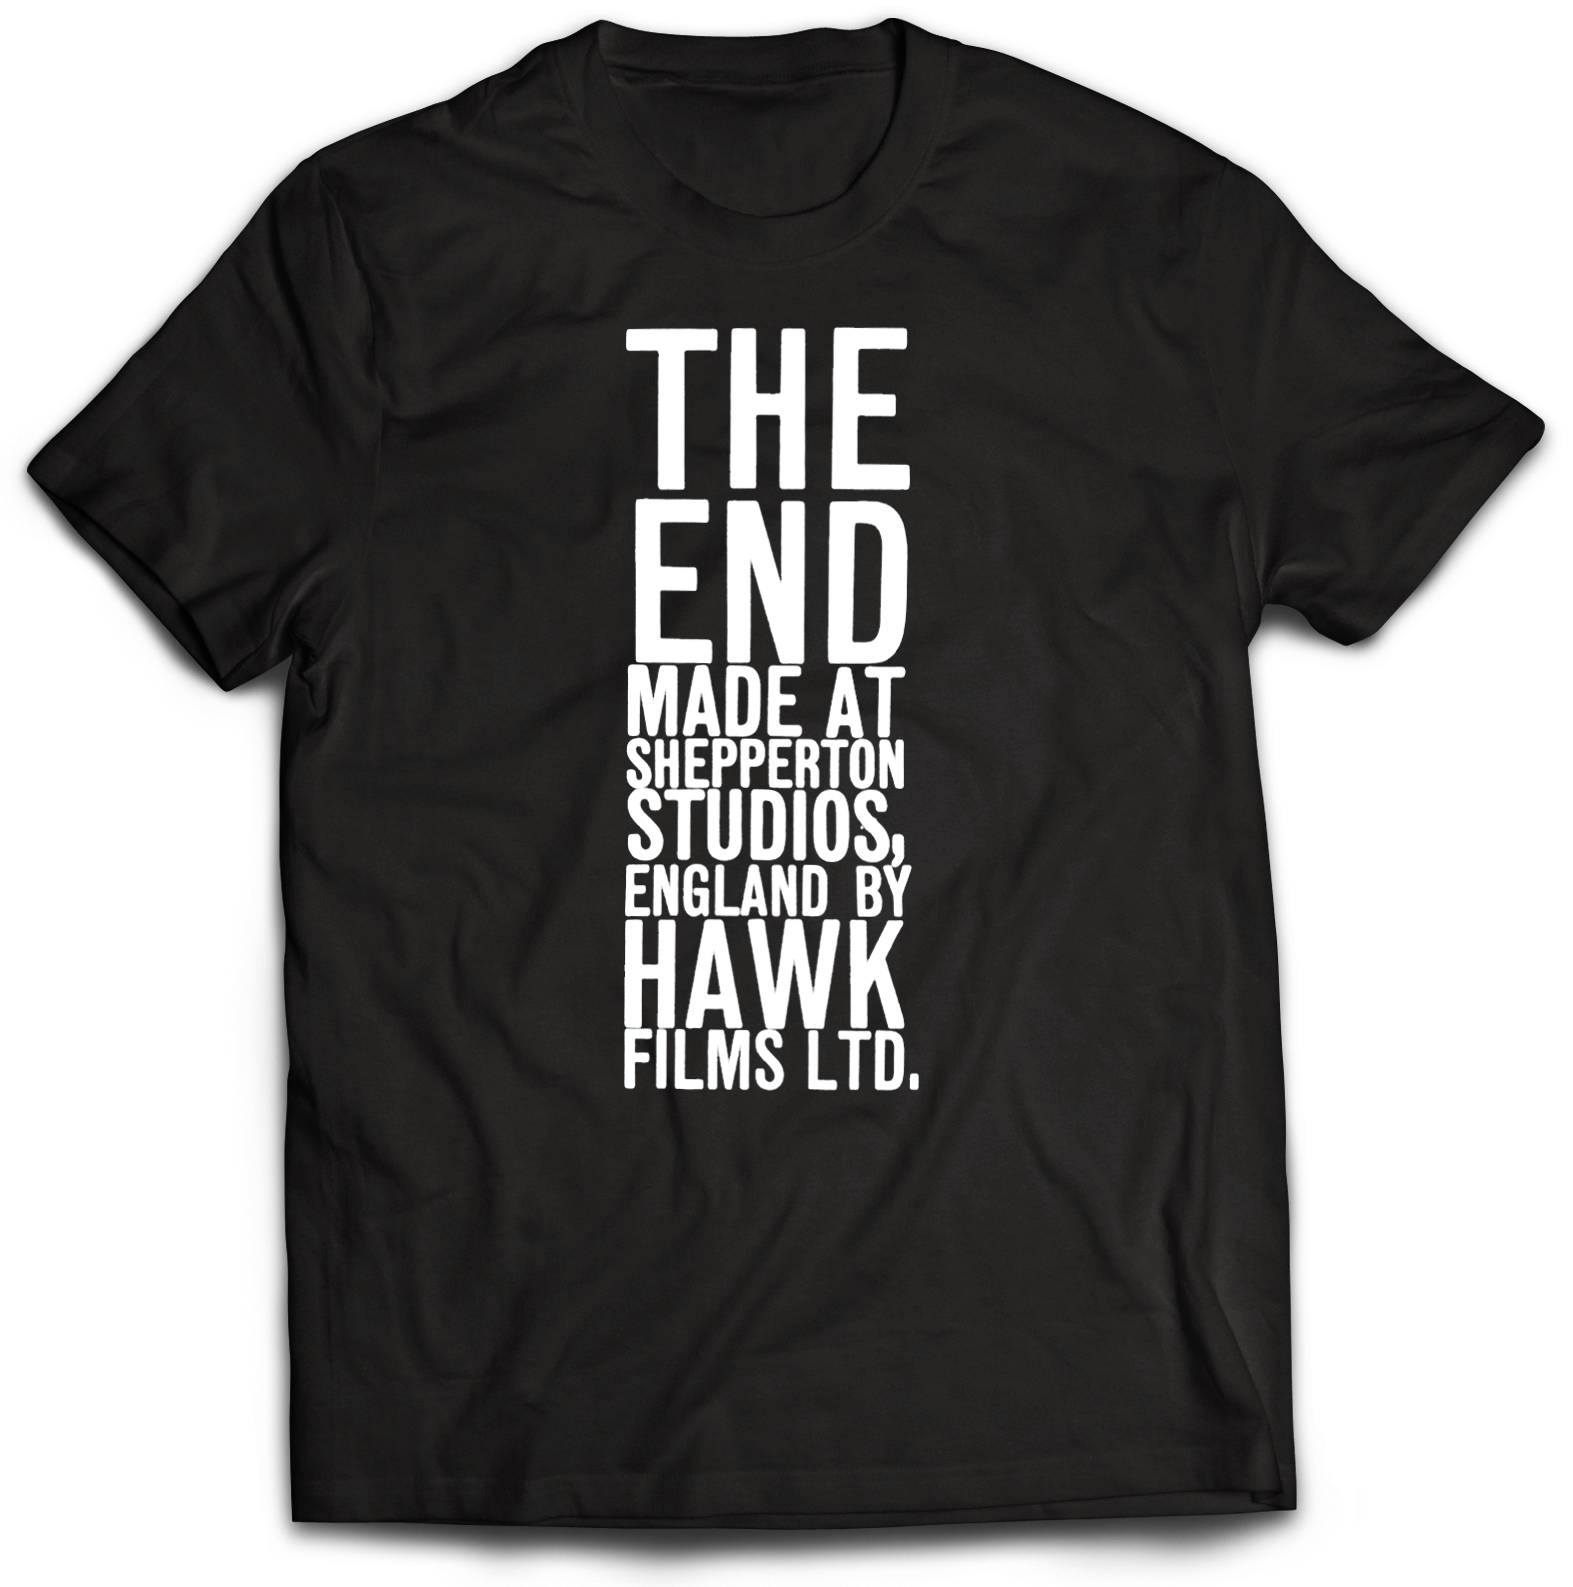 DR. STRANGELOVE, OR:  HOW I LEARNED TO STOP WORRYING AND LOVE THE BOMB - END CREDITS T-SHIRT